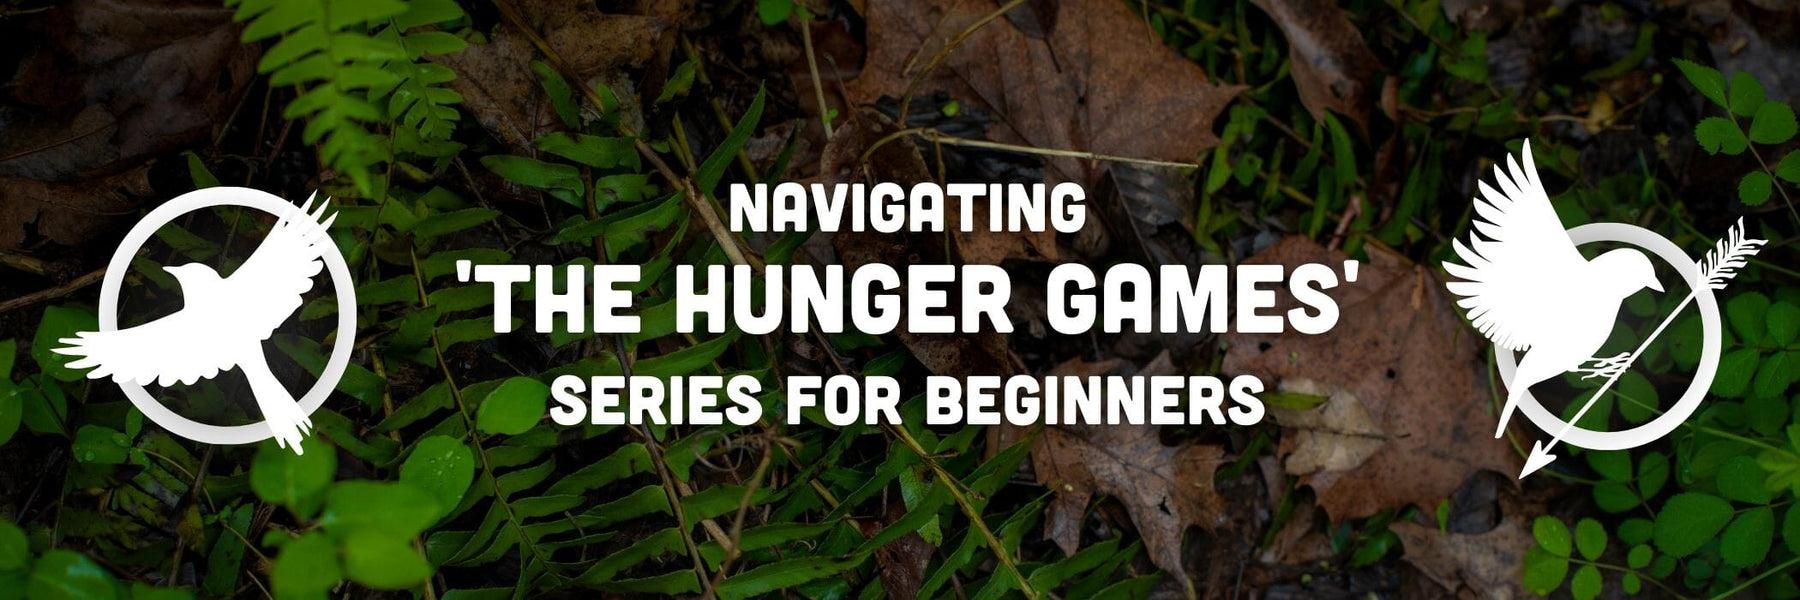 Panem Unveiled: Navigating 'The Hunger Games' Series for Beginners